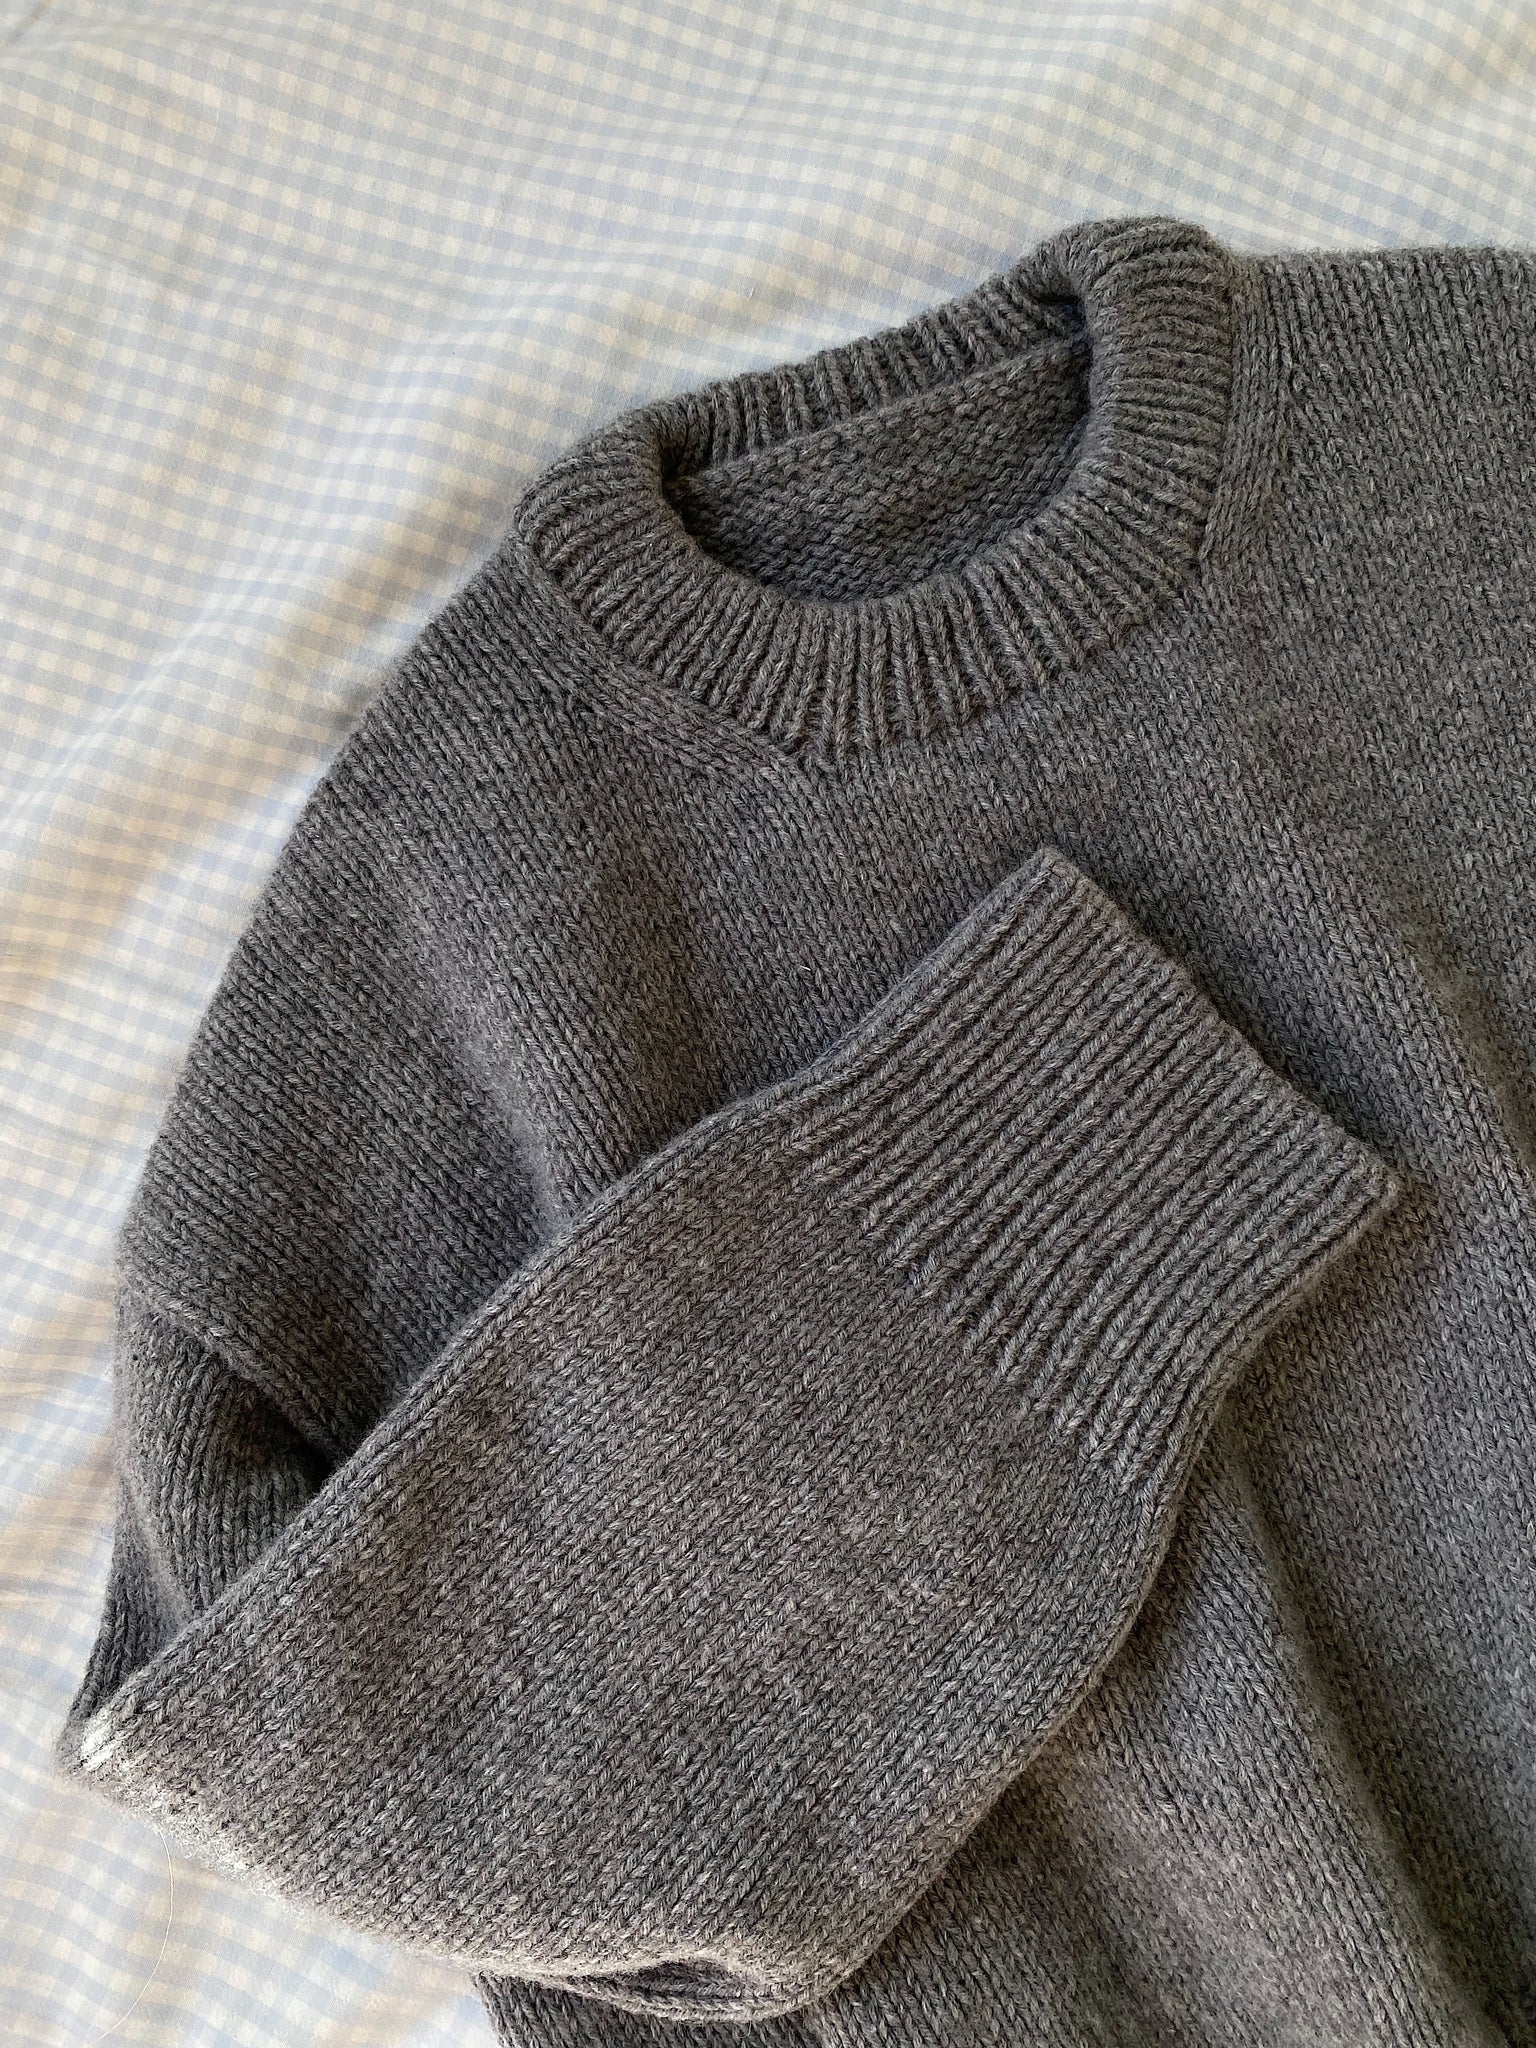 What Sweater is this? Couldn't find it in the 23fw collection. : r